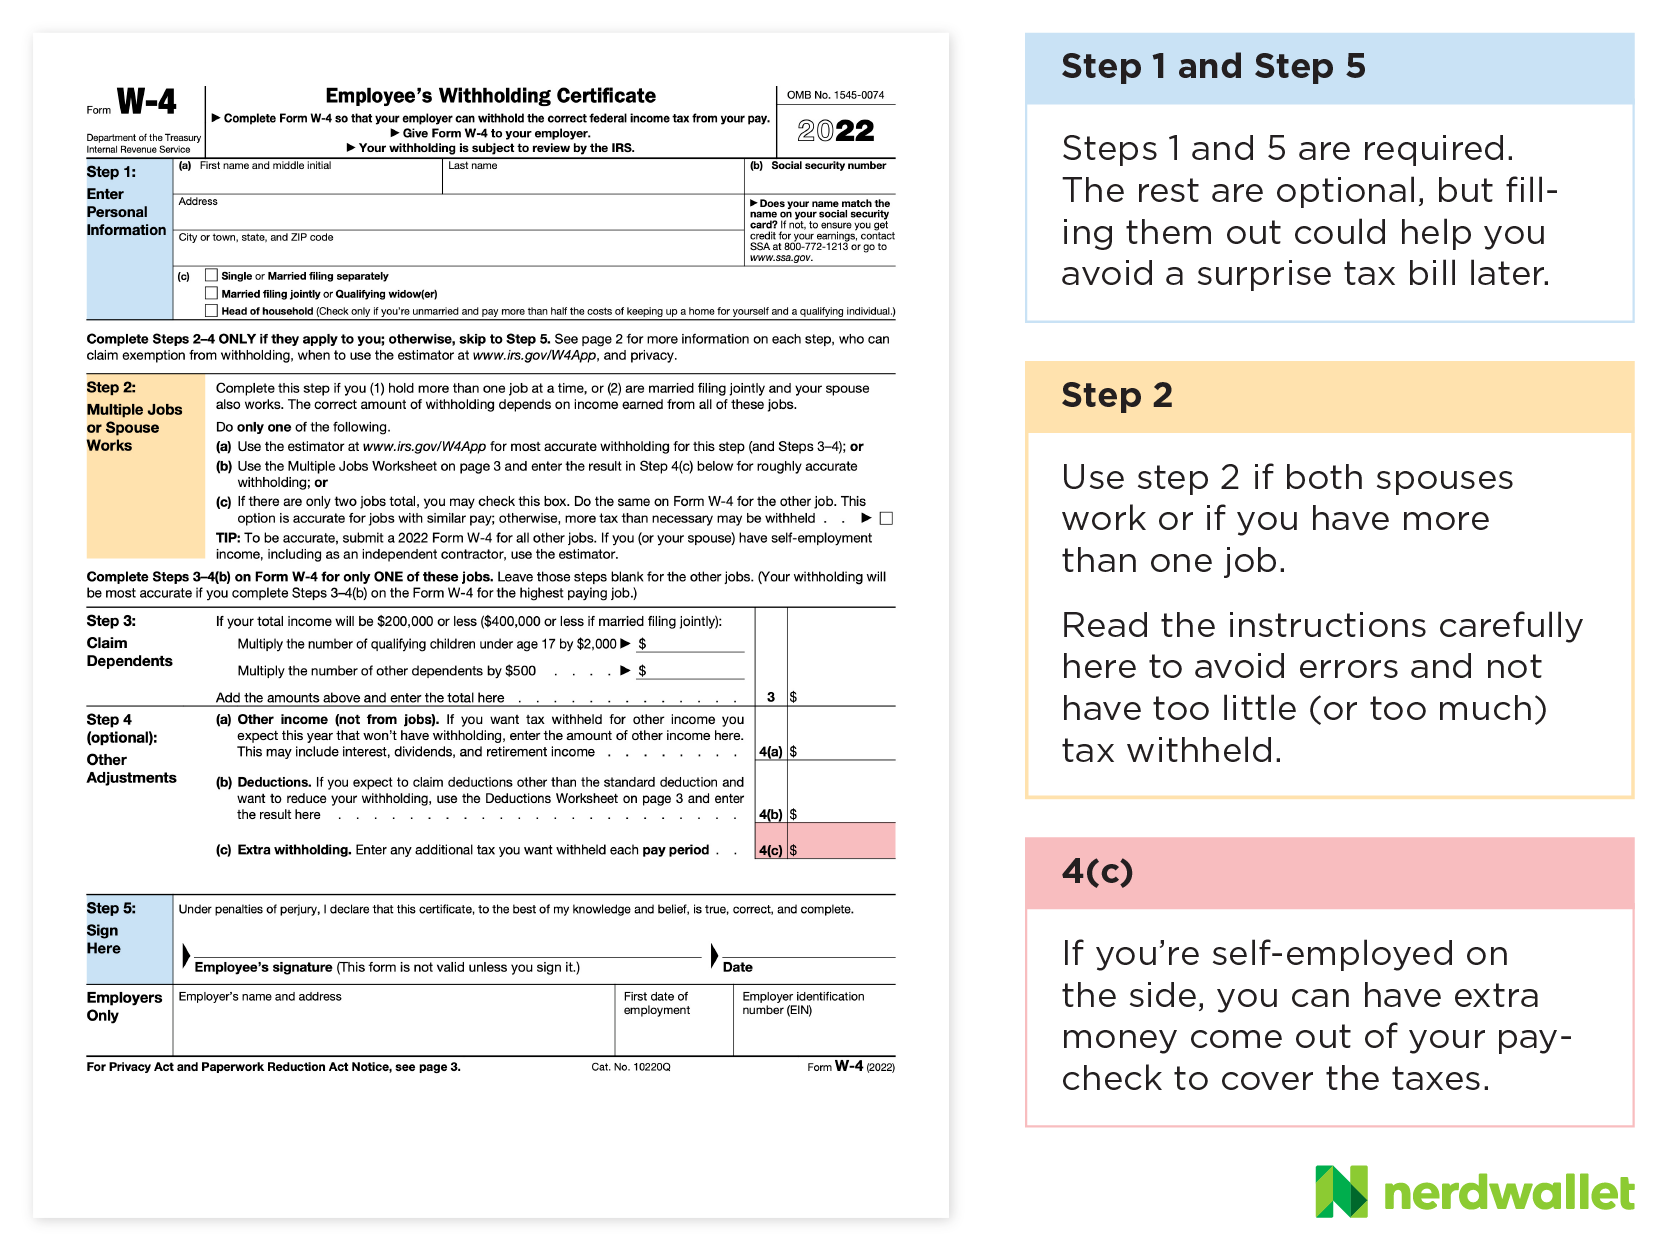 What Is a W4 Form? How to Fill Out an Employee’s Withholding